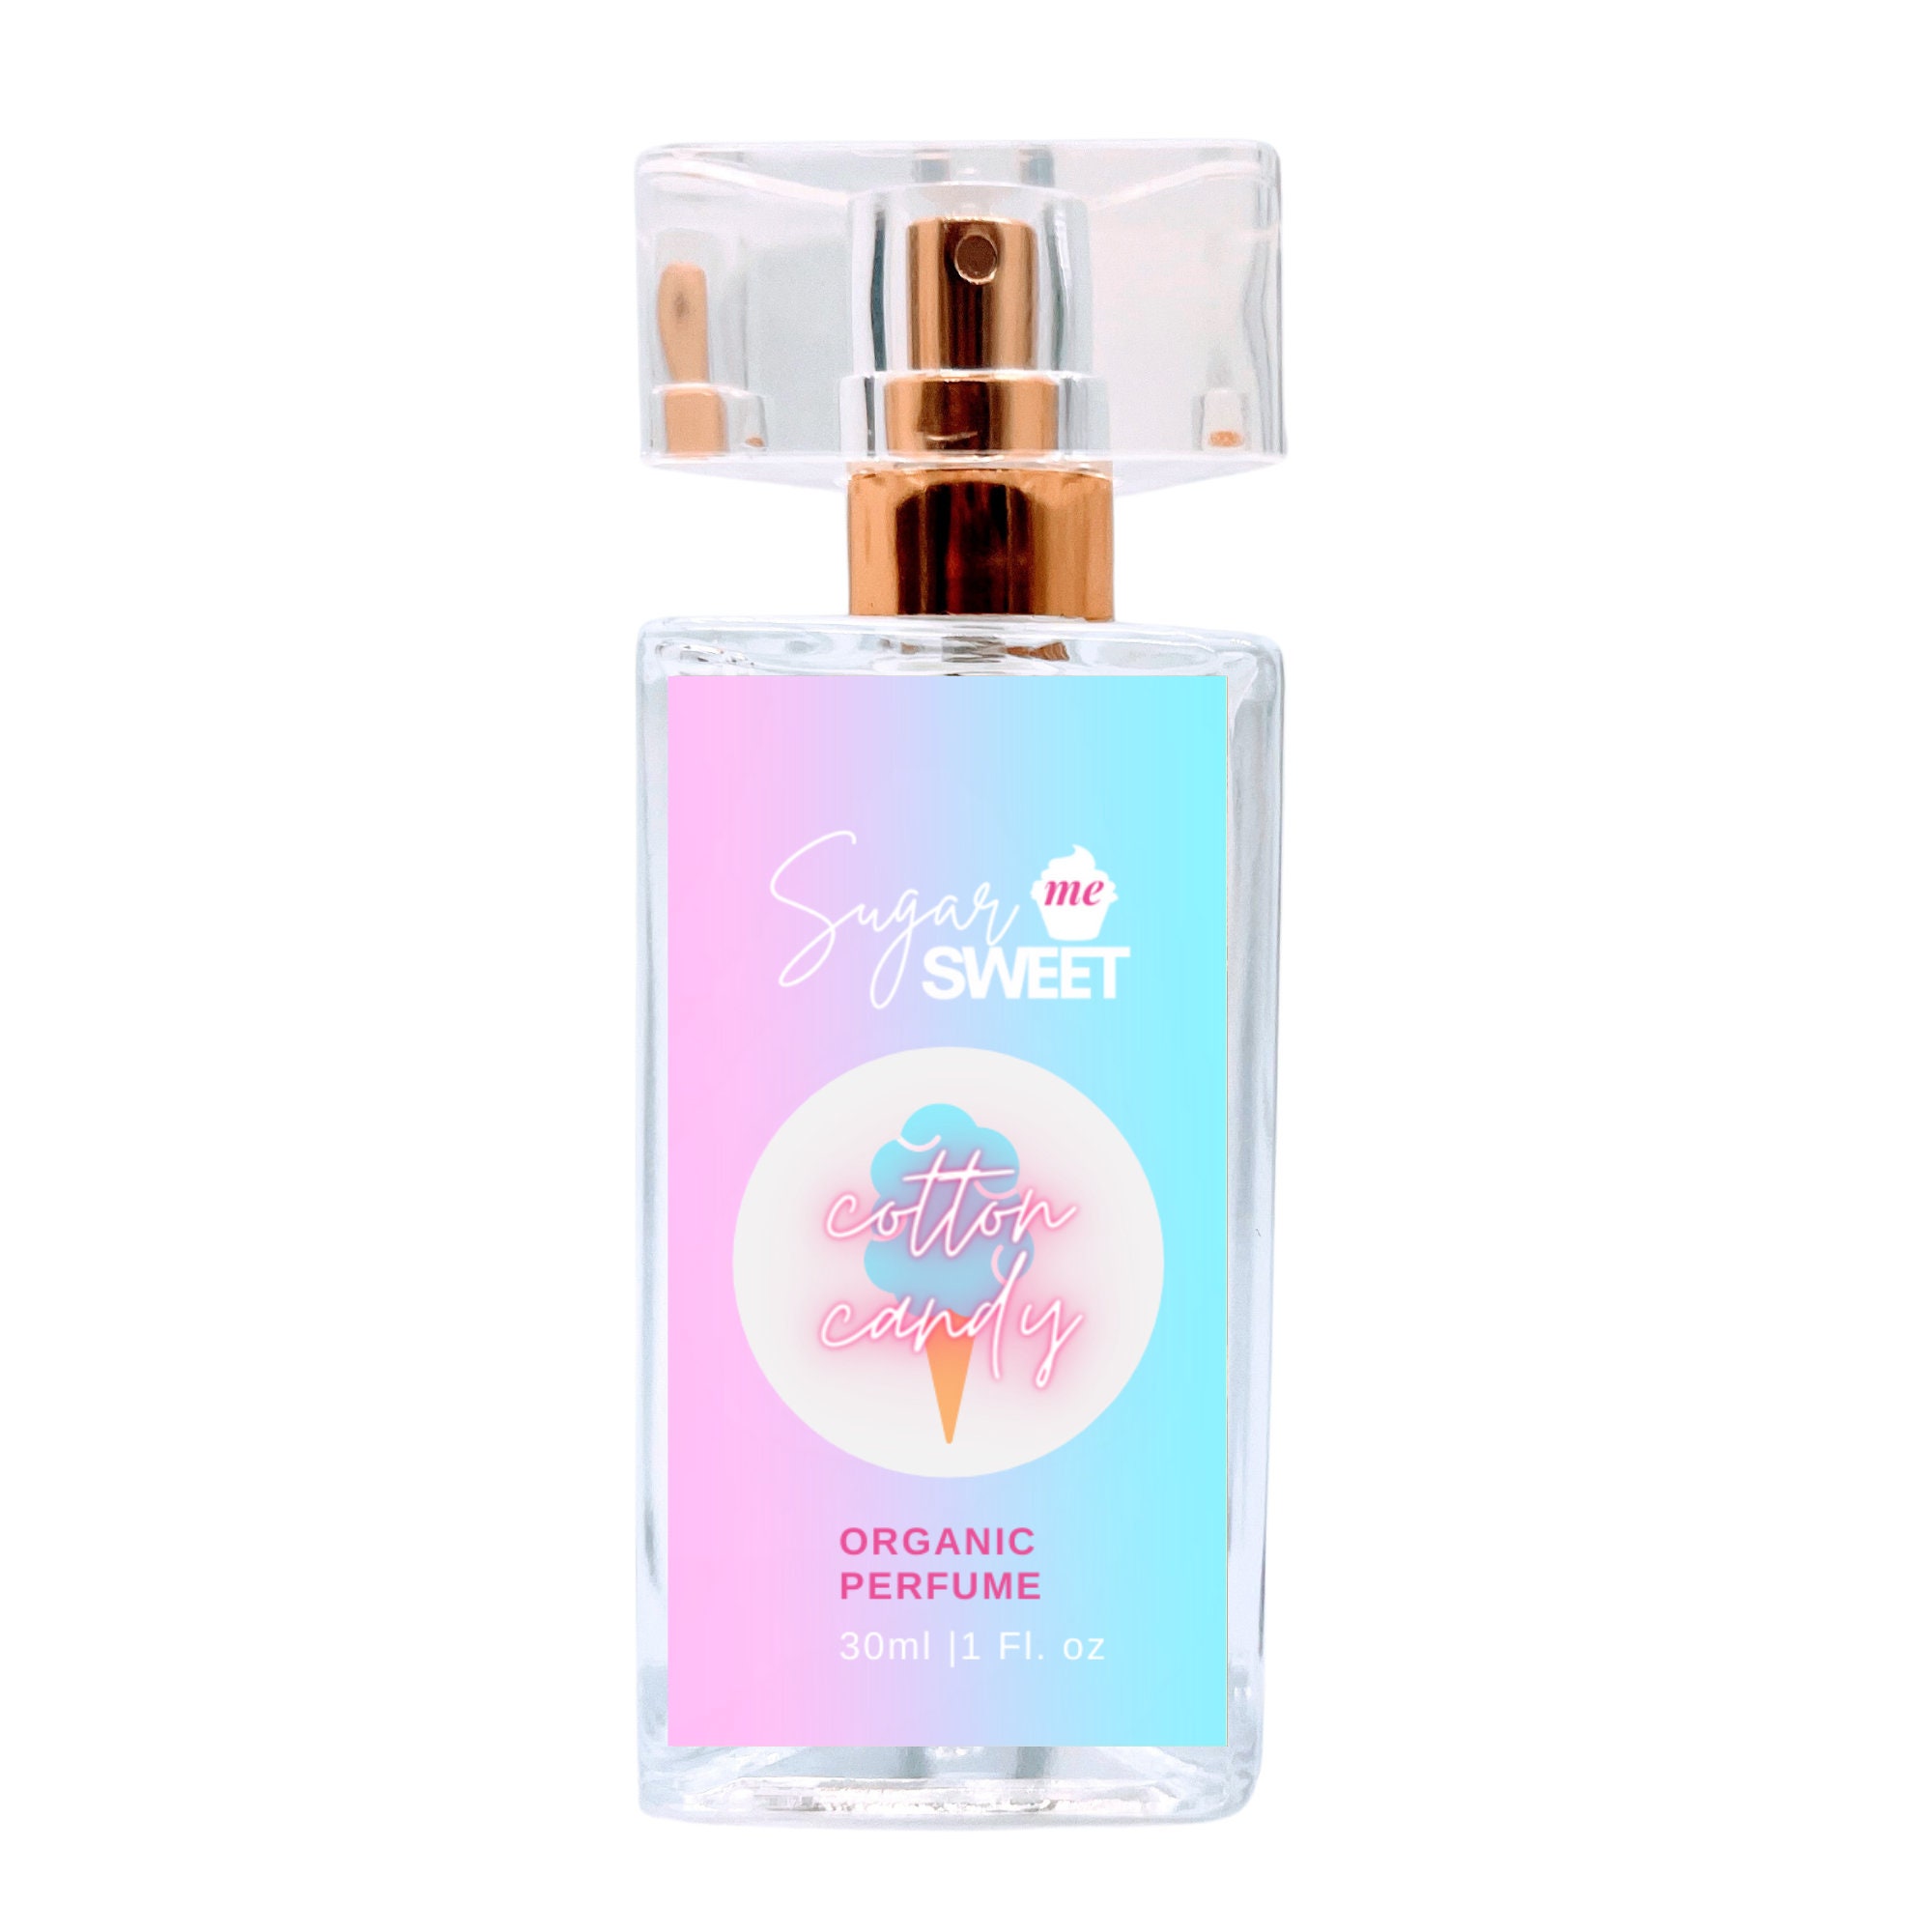 Cotton Candy Perfume Oil – Ancient Bath and Body